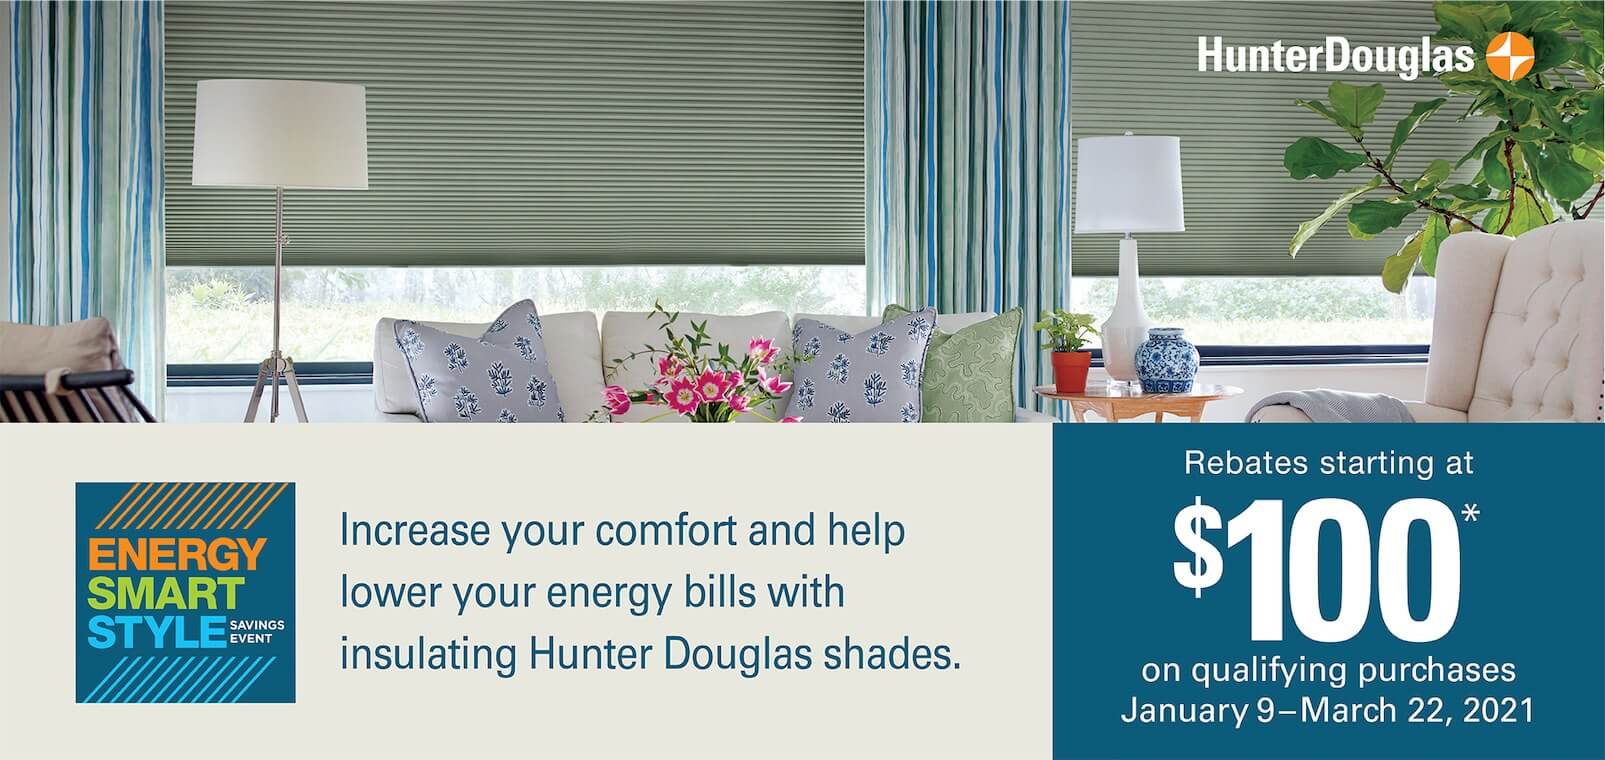 Energy Smart Style Savings Event: Increase your comfort and help lower your energy bills with insulating Hunter Douglas shades. Rebates starting at $100 on qualifying purchases, Jan. 9-March 22.